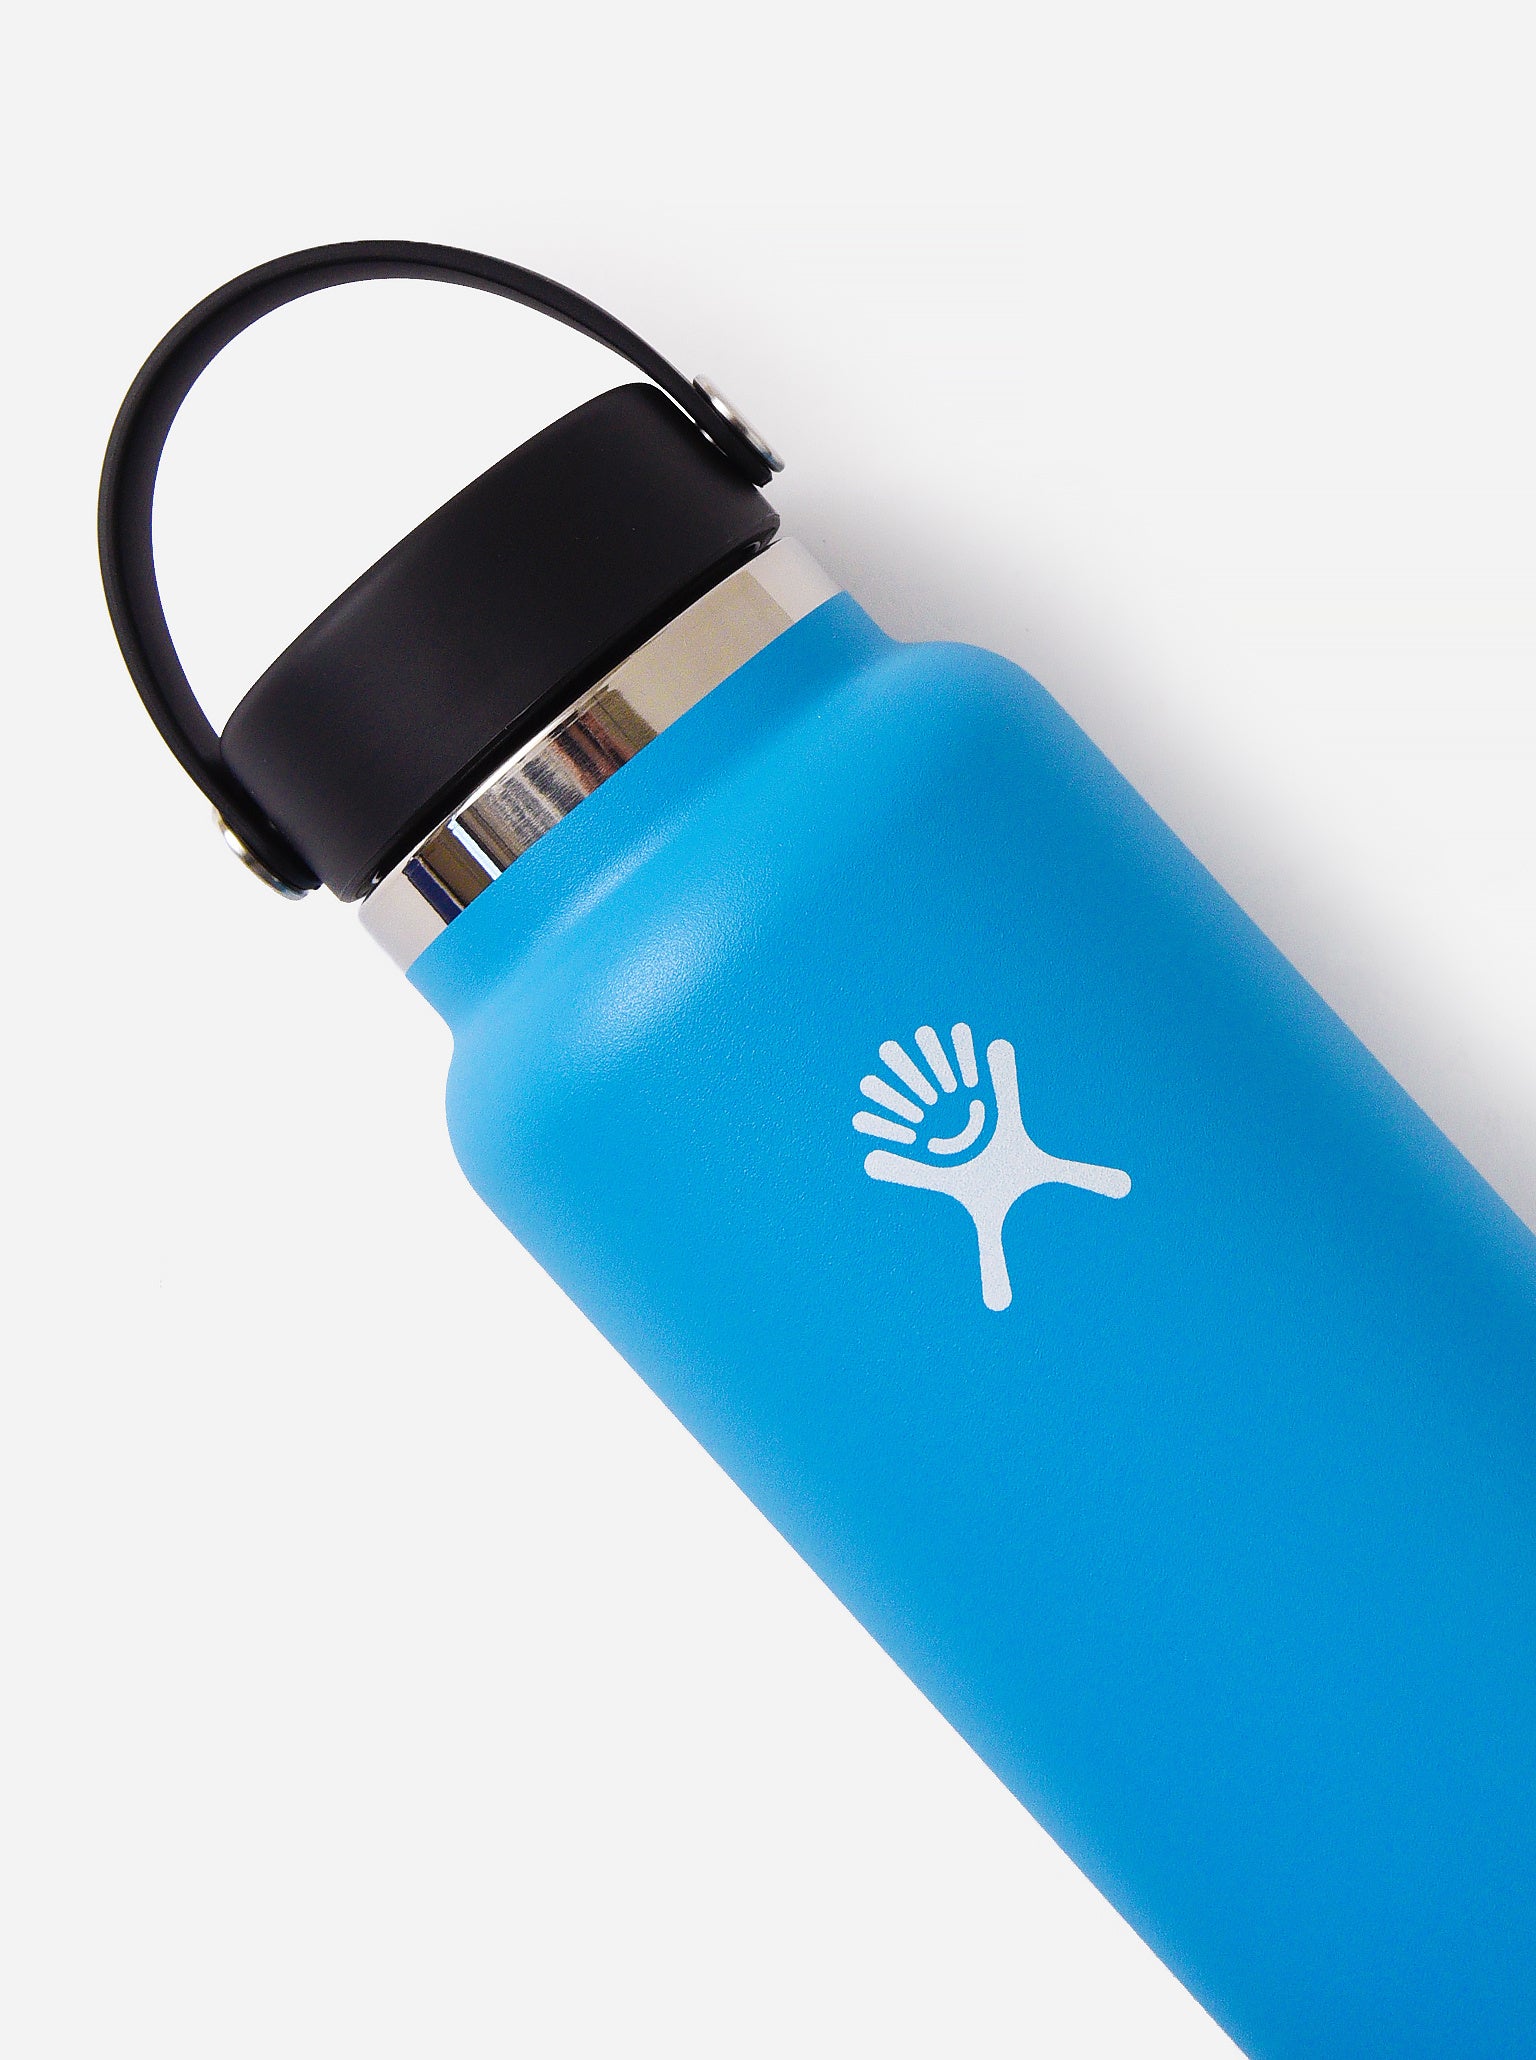 New Hydro Flask Wide Mouth Temp Shield 32oz Water Bottle Blue w/ Accessories